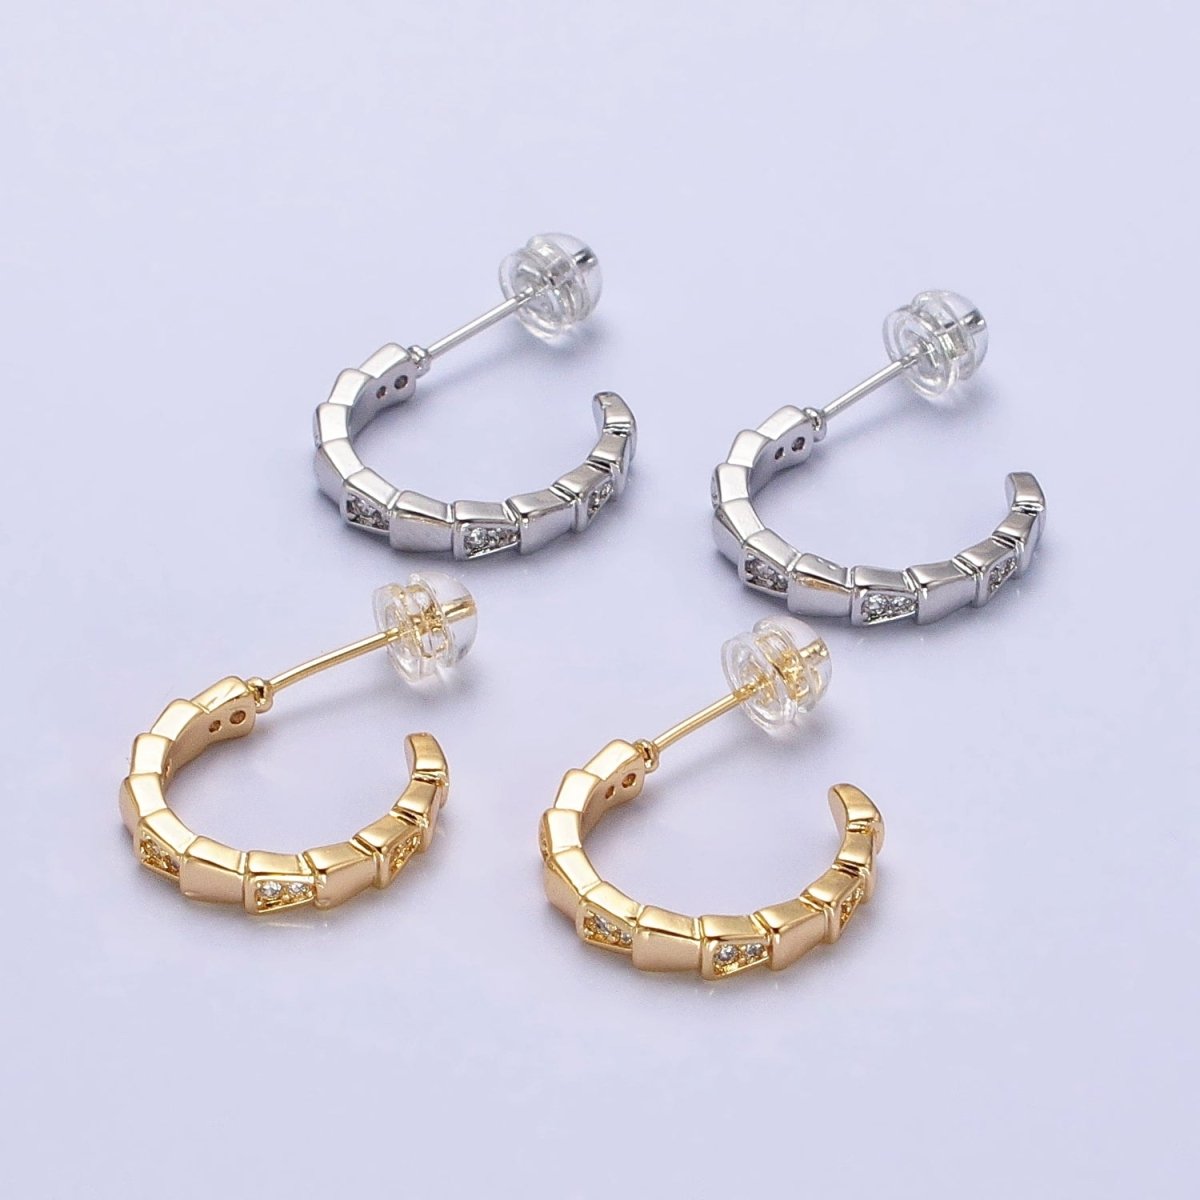 Modern Gold Hoop Earring With Cz Stone Silver Lizard Tail Design AB643 AB644 - DLUXCA